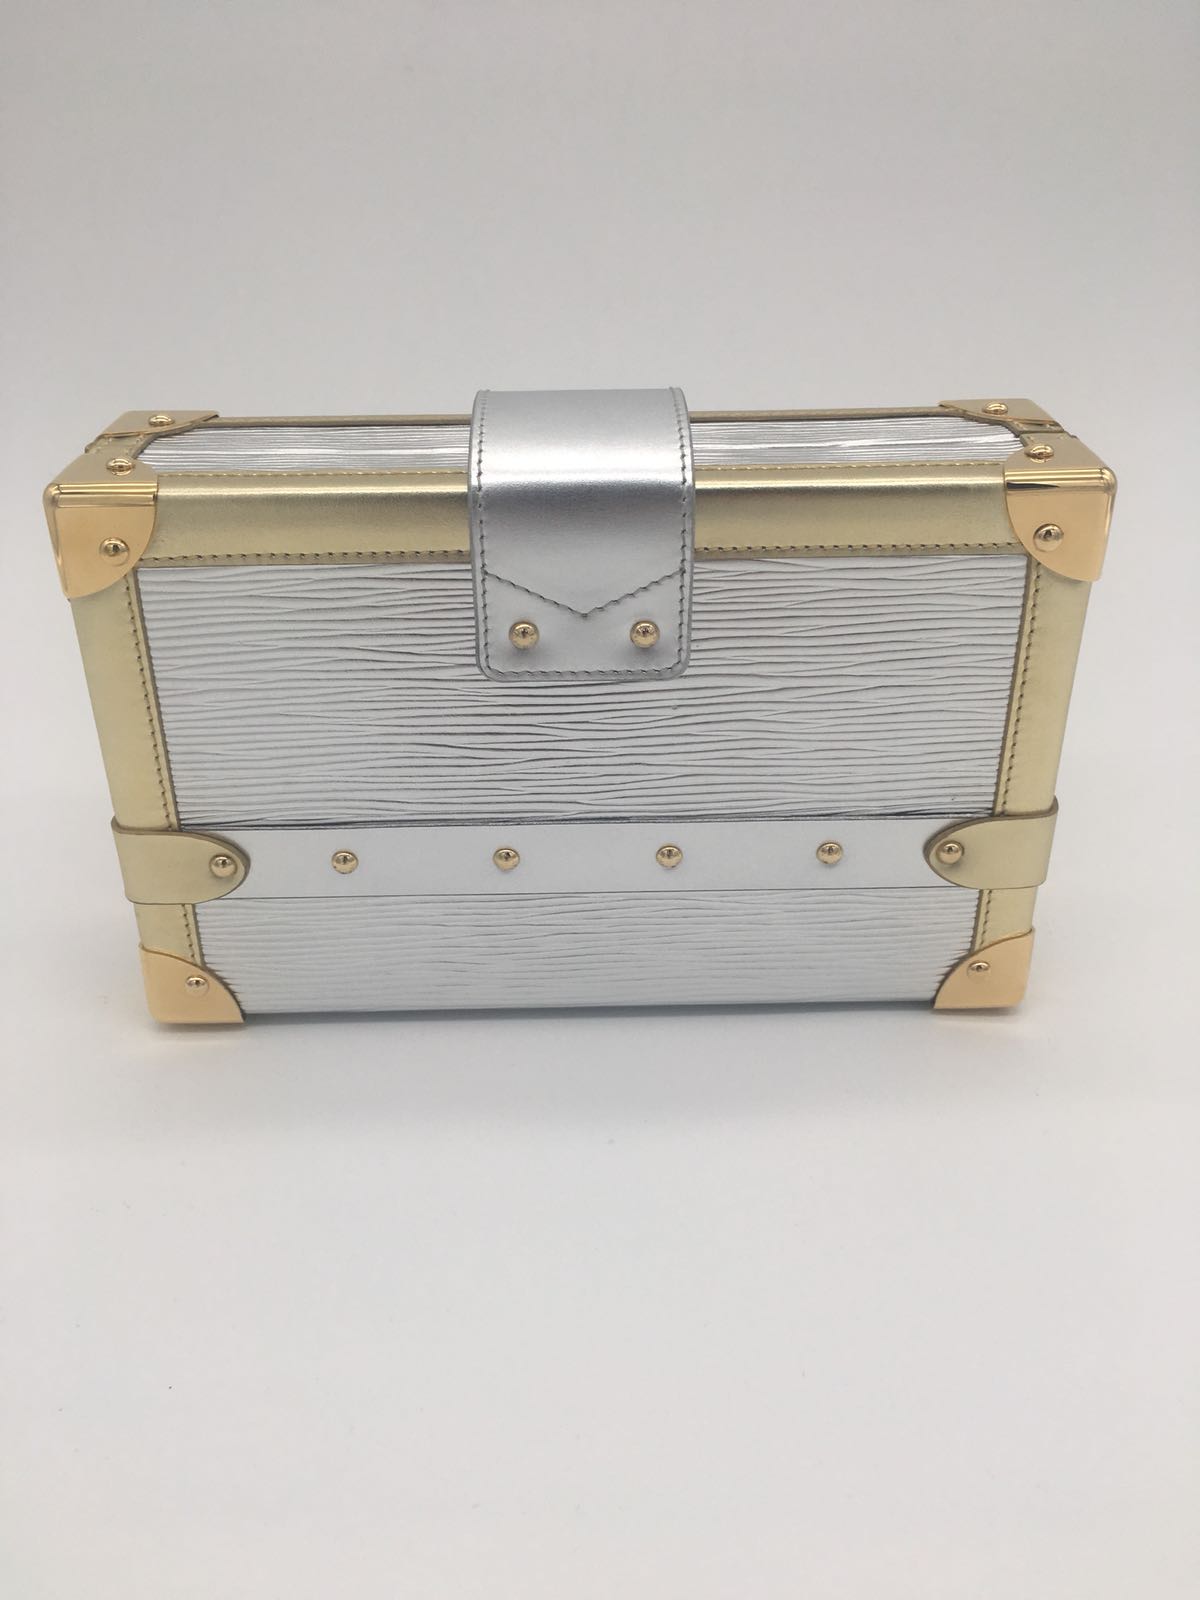 Sold at Auction: Louis Vuitton, A SOPHISTICATED LOUIS VUITTON TAURILLON PETITE  MALLE IN WHITE LEATHER WITH SILVER TONE HARDWARE LOUIS VUITTON, 2019